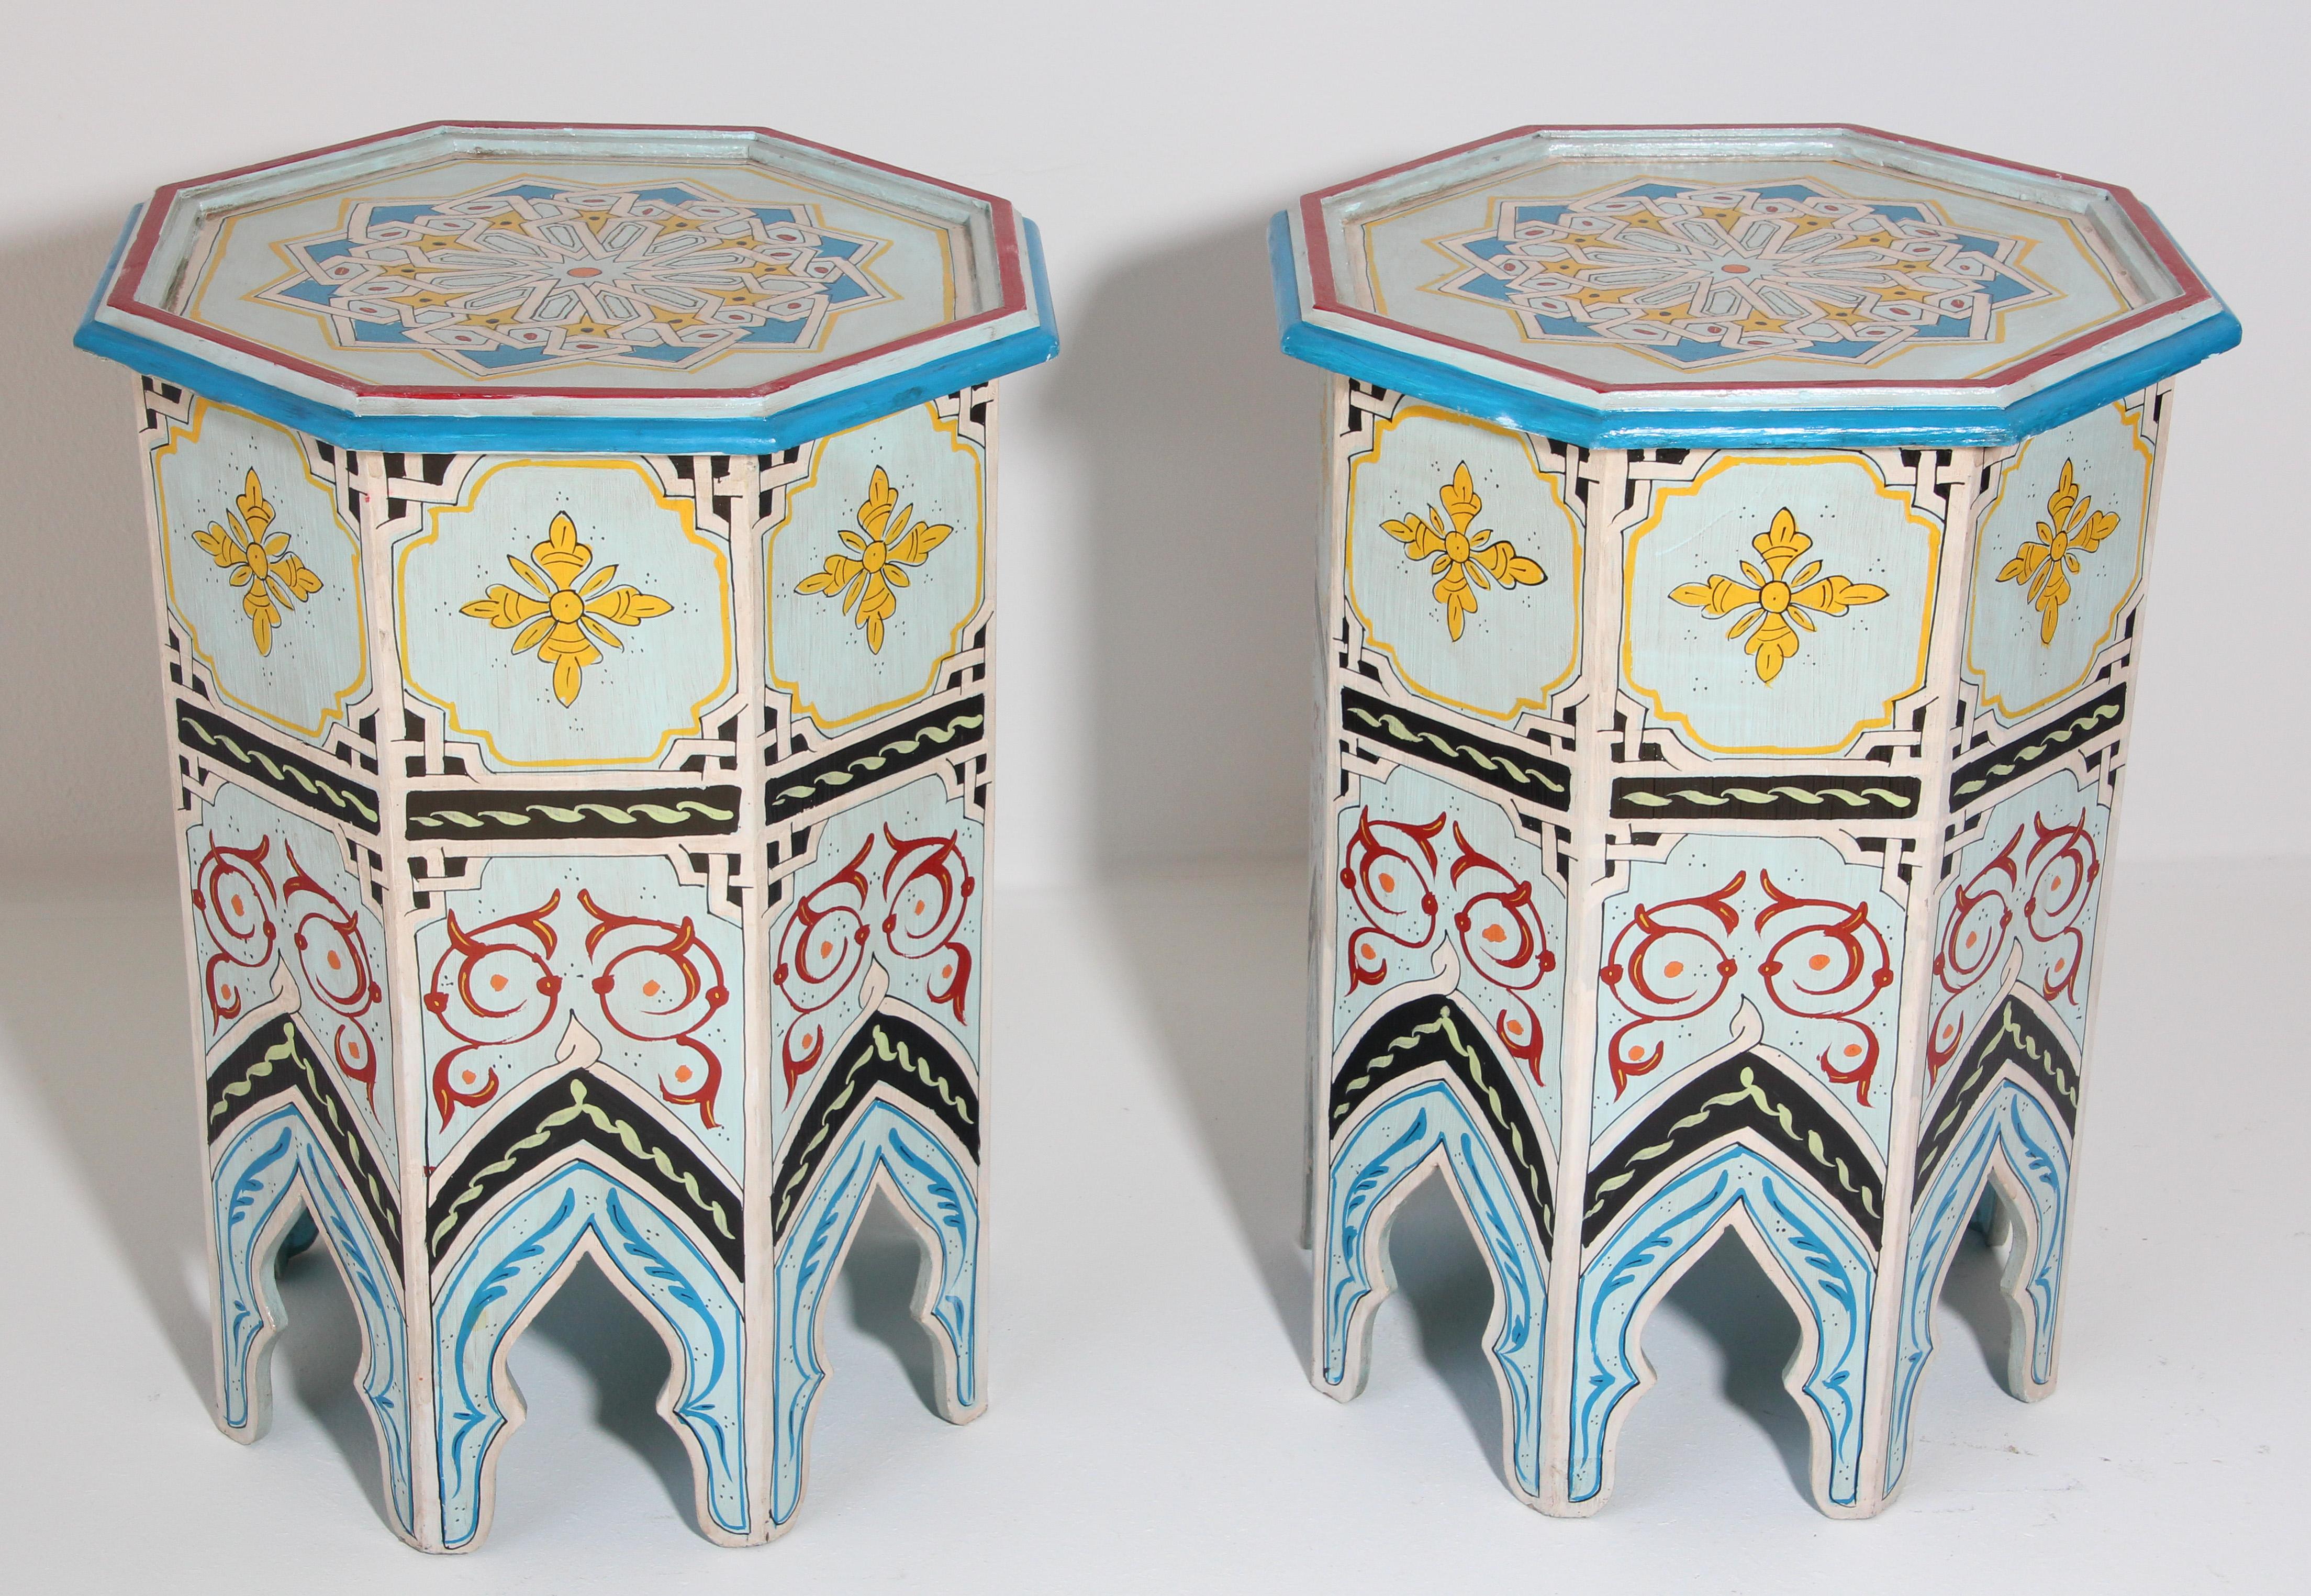 Moroccan handcrafted and ivory color hand painted tabouret or side table.
Octagonal shape pedestal table with Moorish arches.
Very decorative fine artwork in octagonal shape base.
You can use them as nightstand, stools, or side pedestal